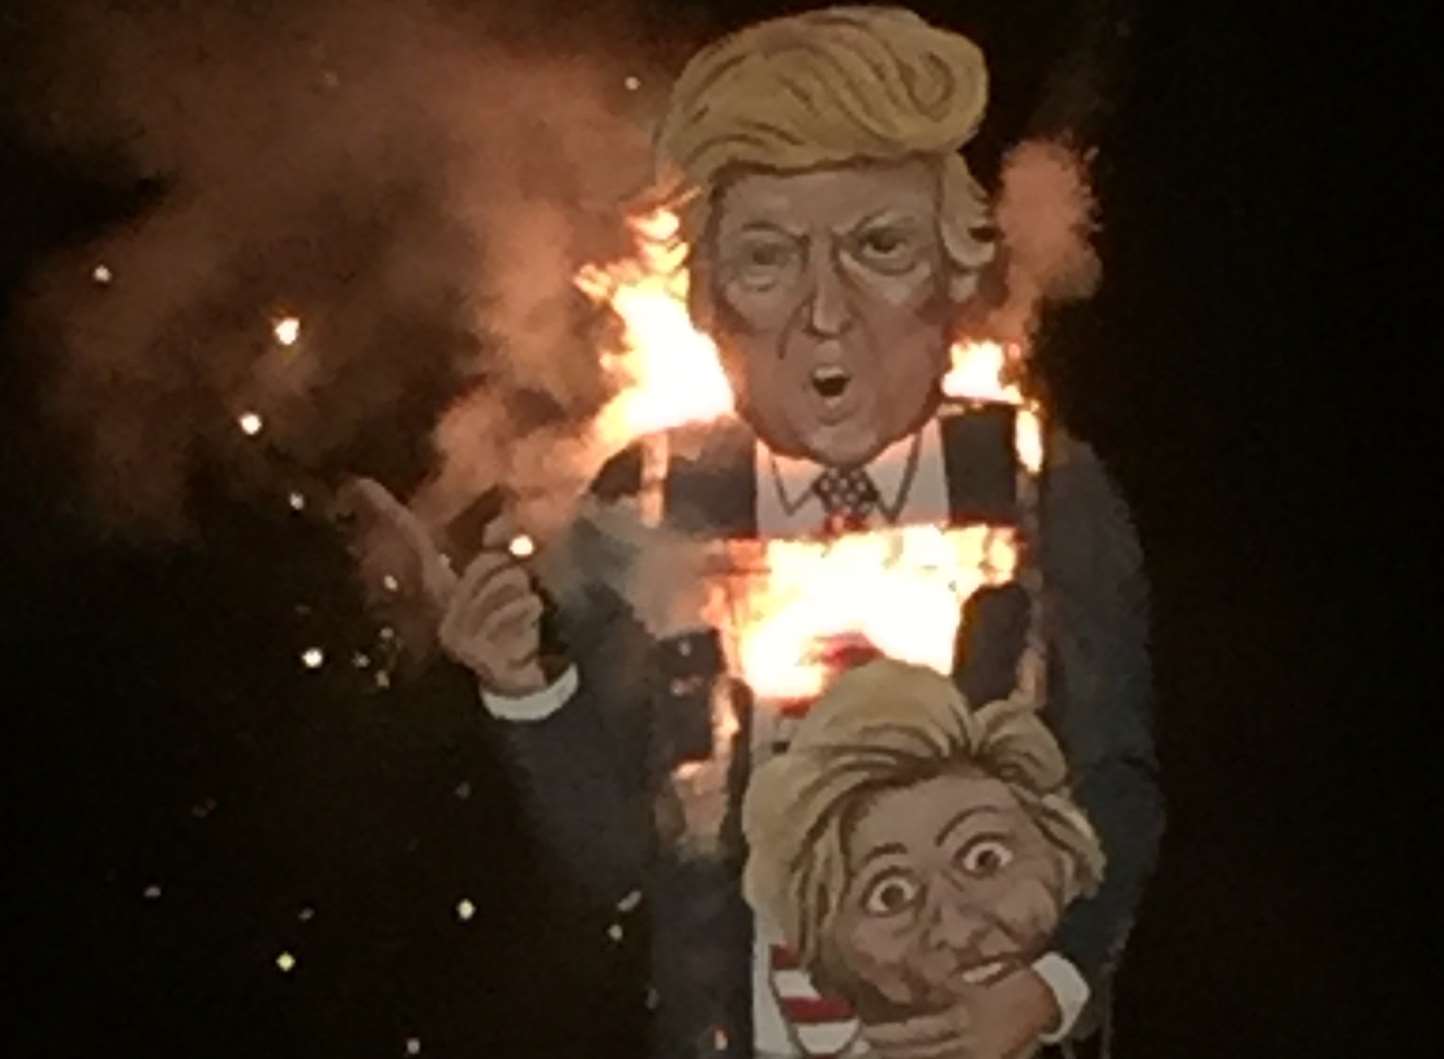 The Donald Trump figure goes up in flames